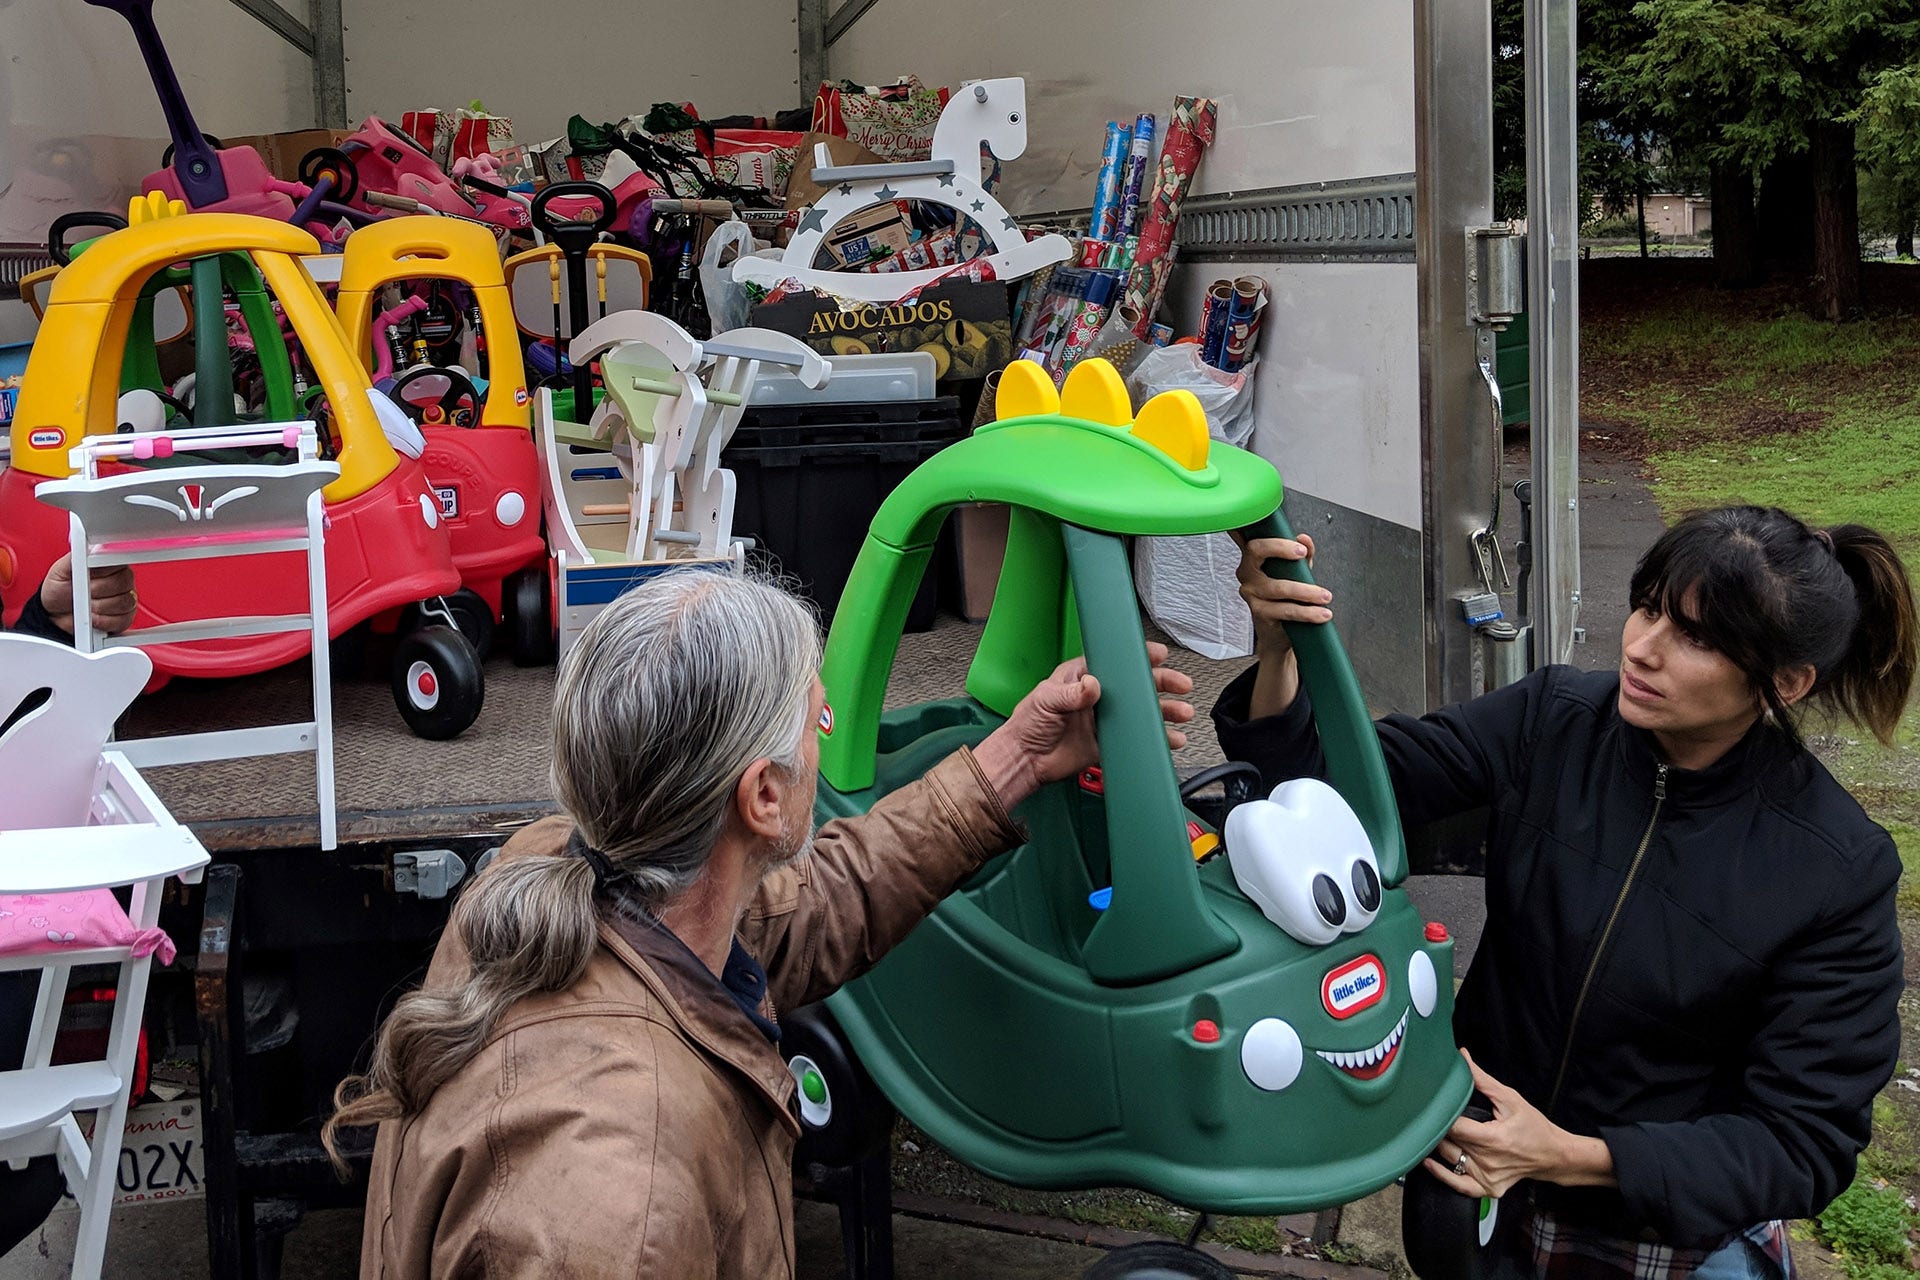 A man and a woman unloading a truck filled wtih toys for young children